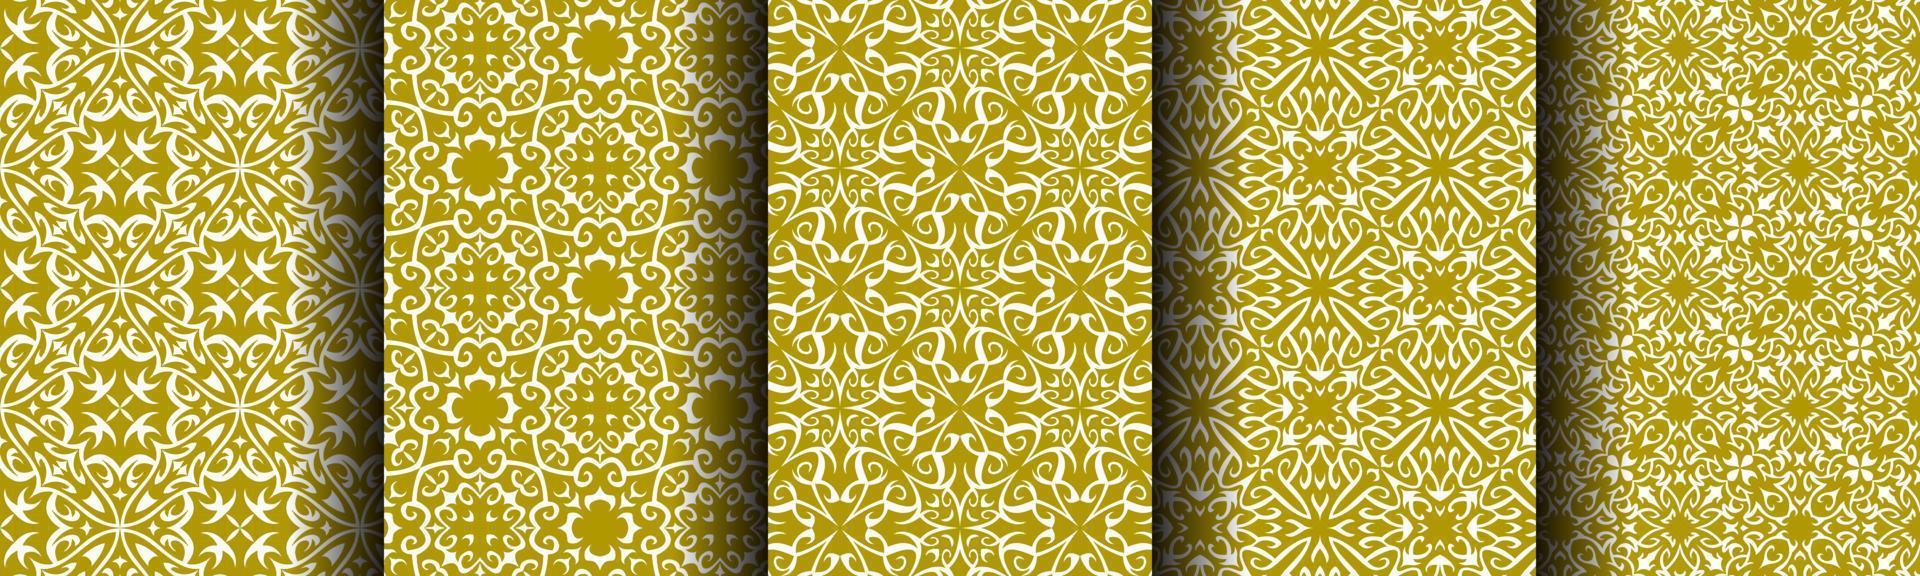 traditional pattern gold abstract bundle set vector